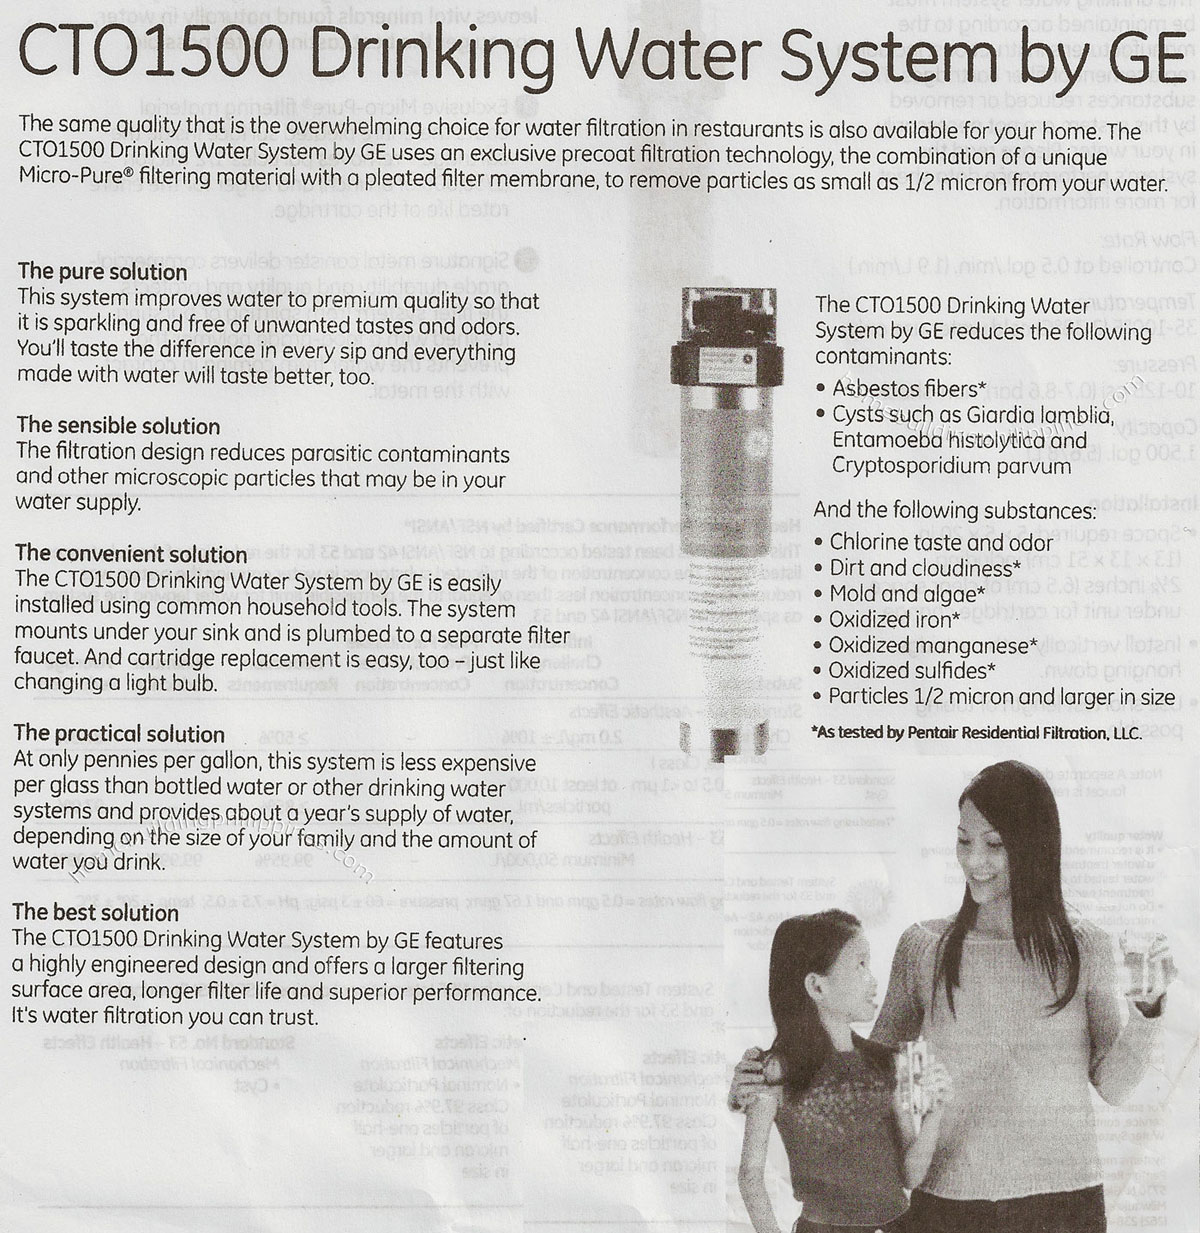 GE CTO1500 Drinking Water System